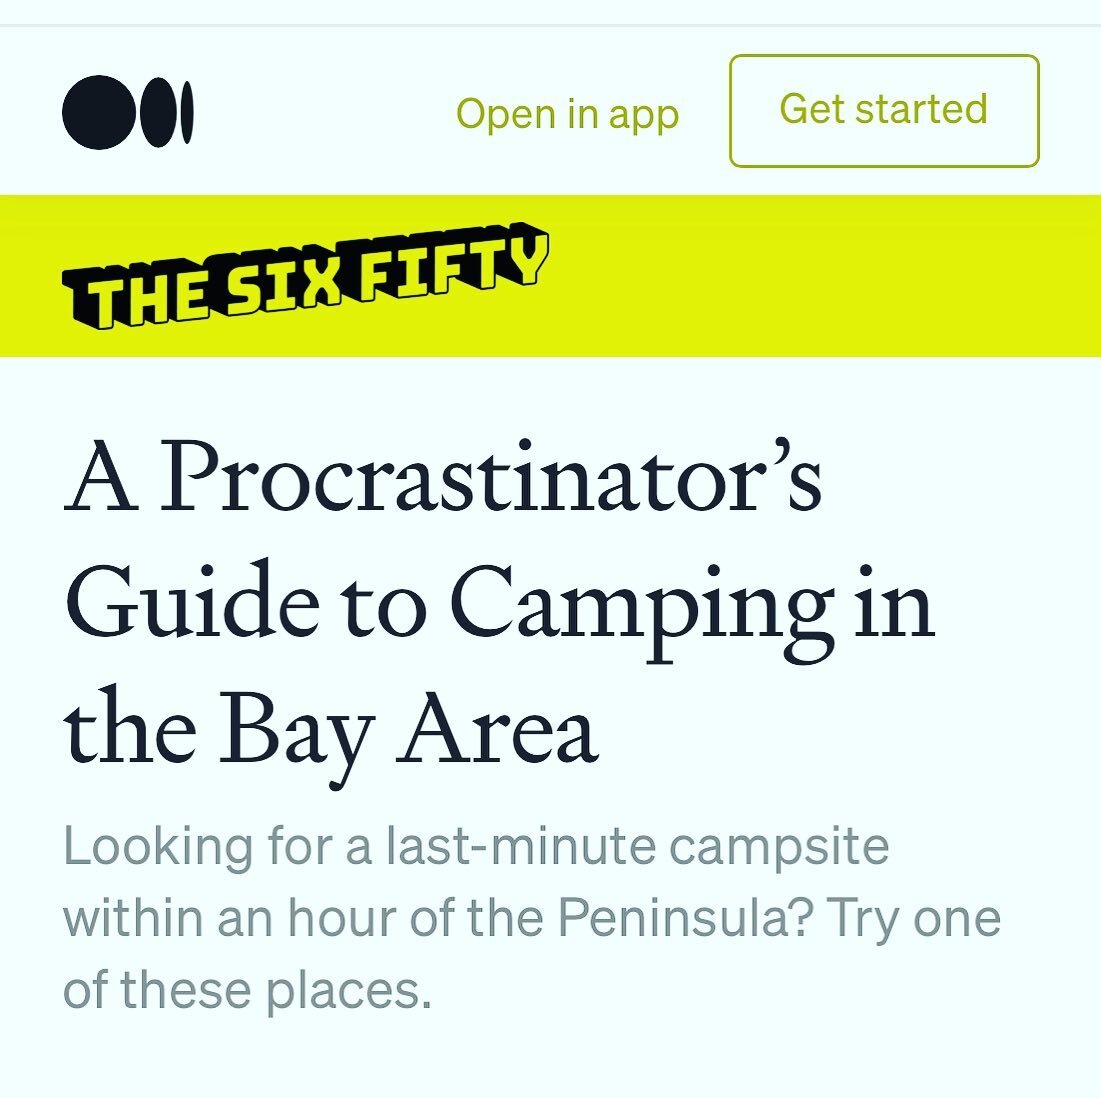 This story I wrote a few years ago is getting more hits now than ever ... lol ... I guess people want to escape to wilderness last minute ... https://thesixfifty.com/a-procrastinators-guide-to-camping-in-the-bay-area-7db7e491c8cc